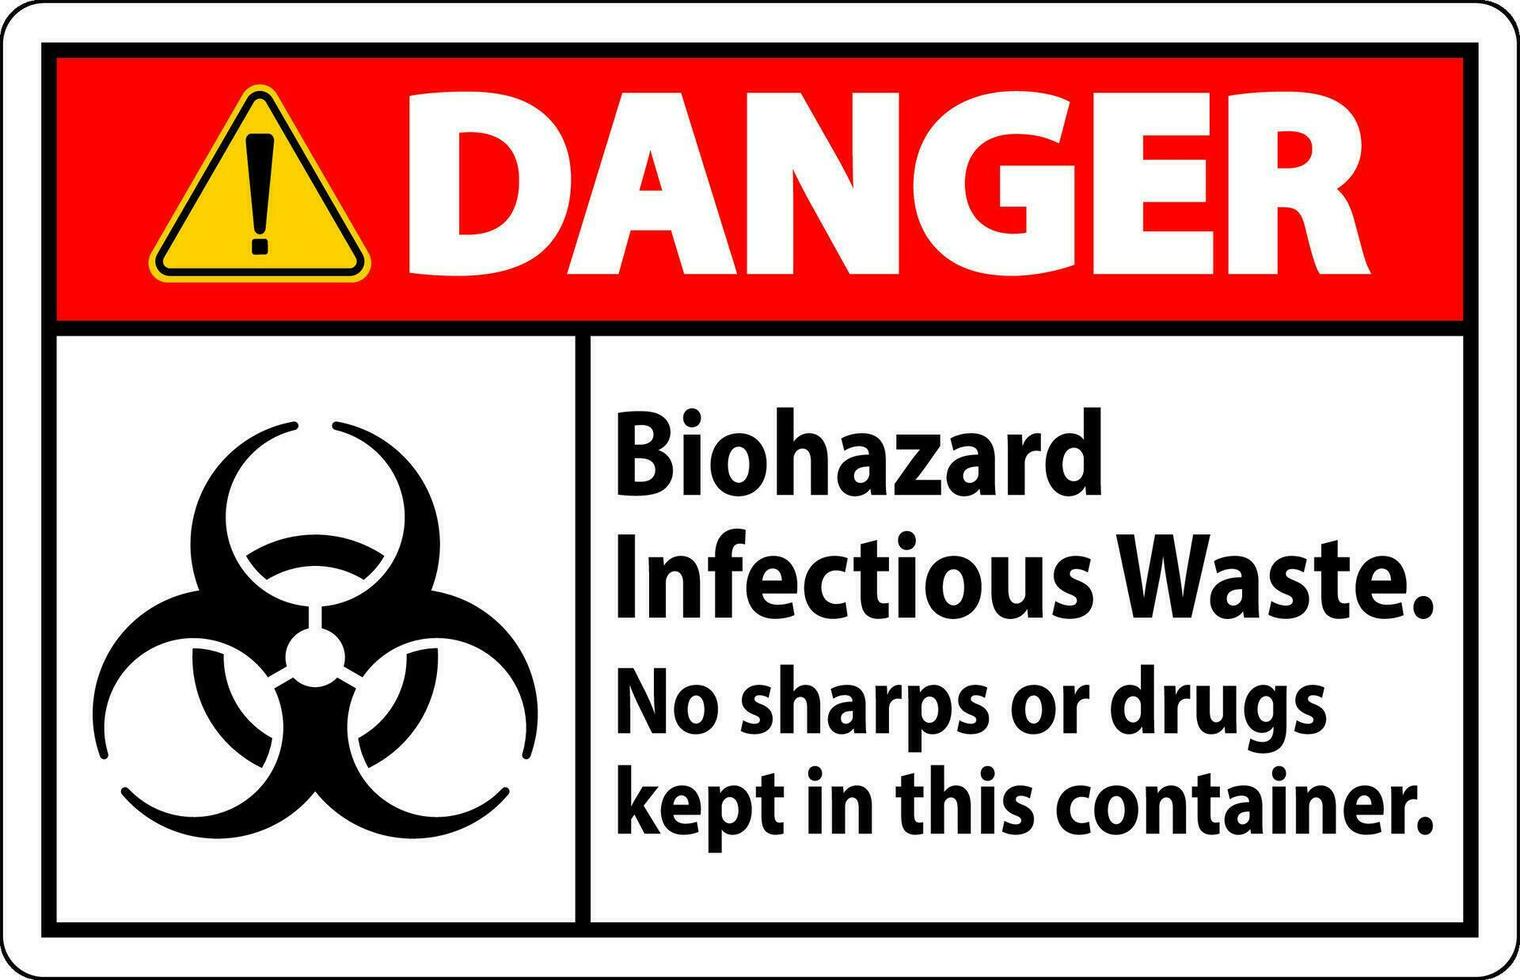 Danger Label Biohazard Infectious Waste, No Sharps Or Drugs Kept In This Container vector